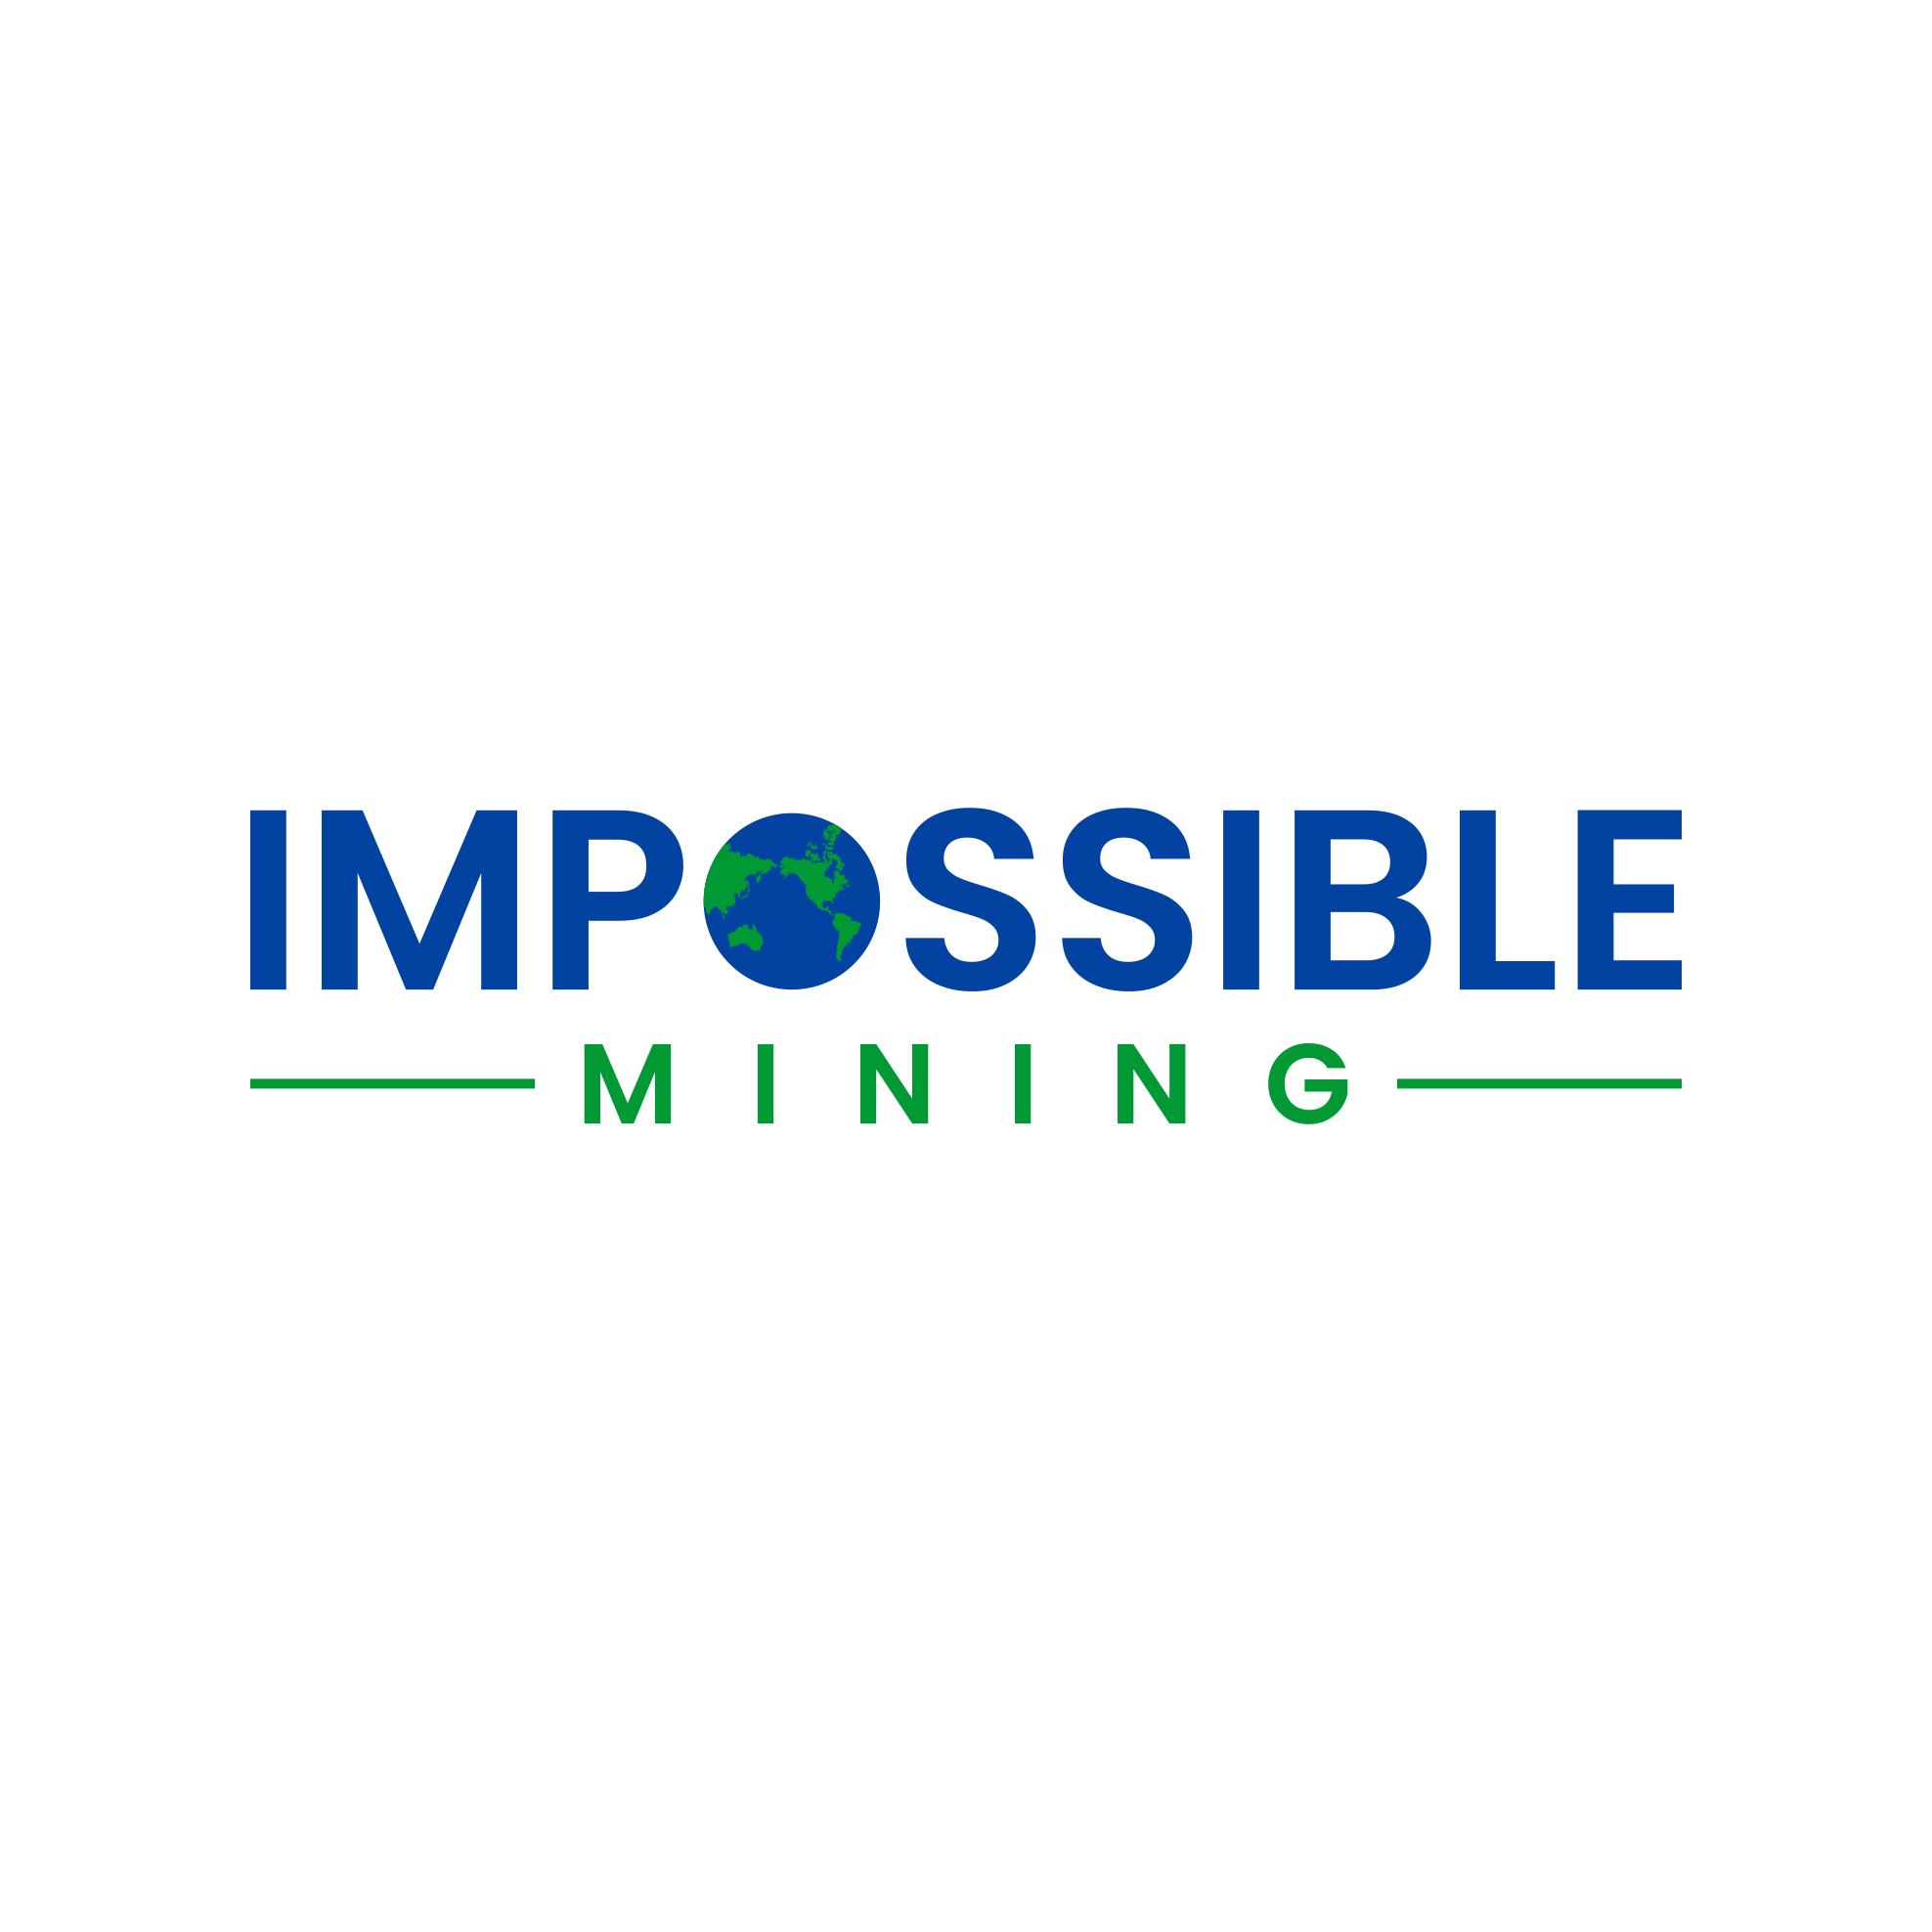 Impossible Mining